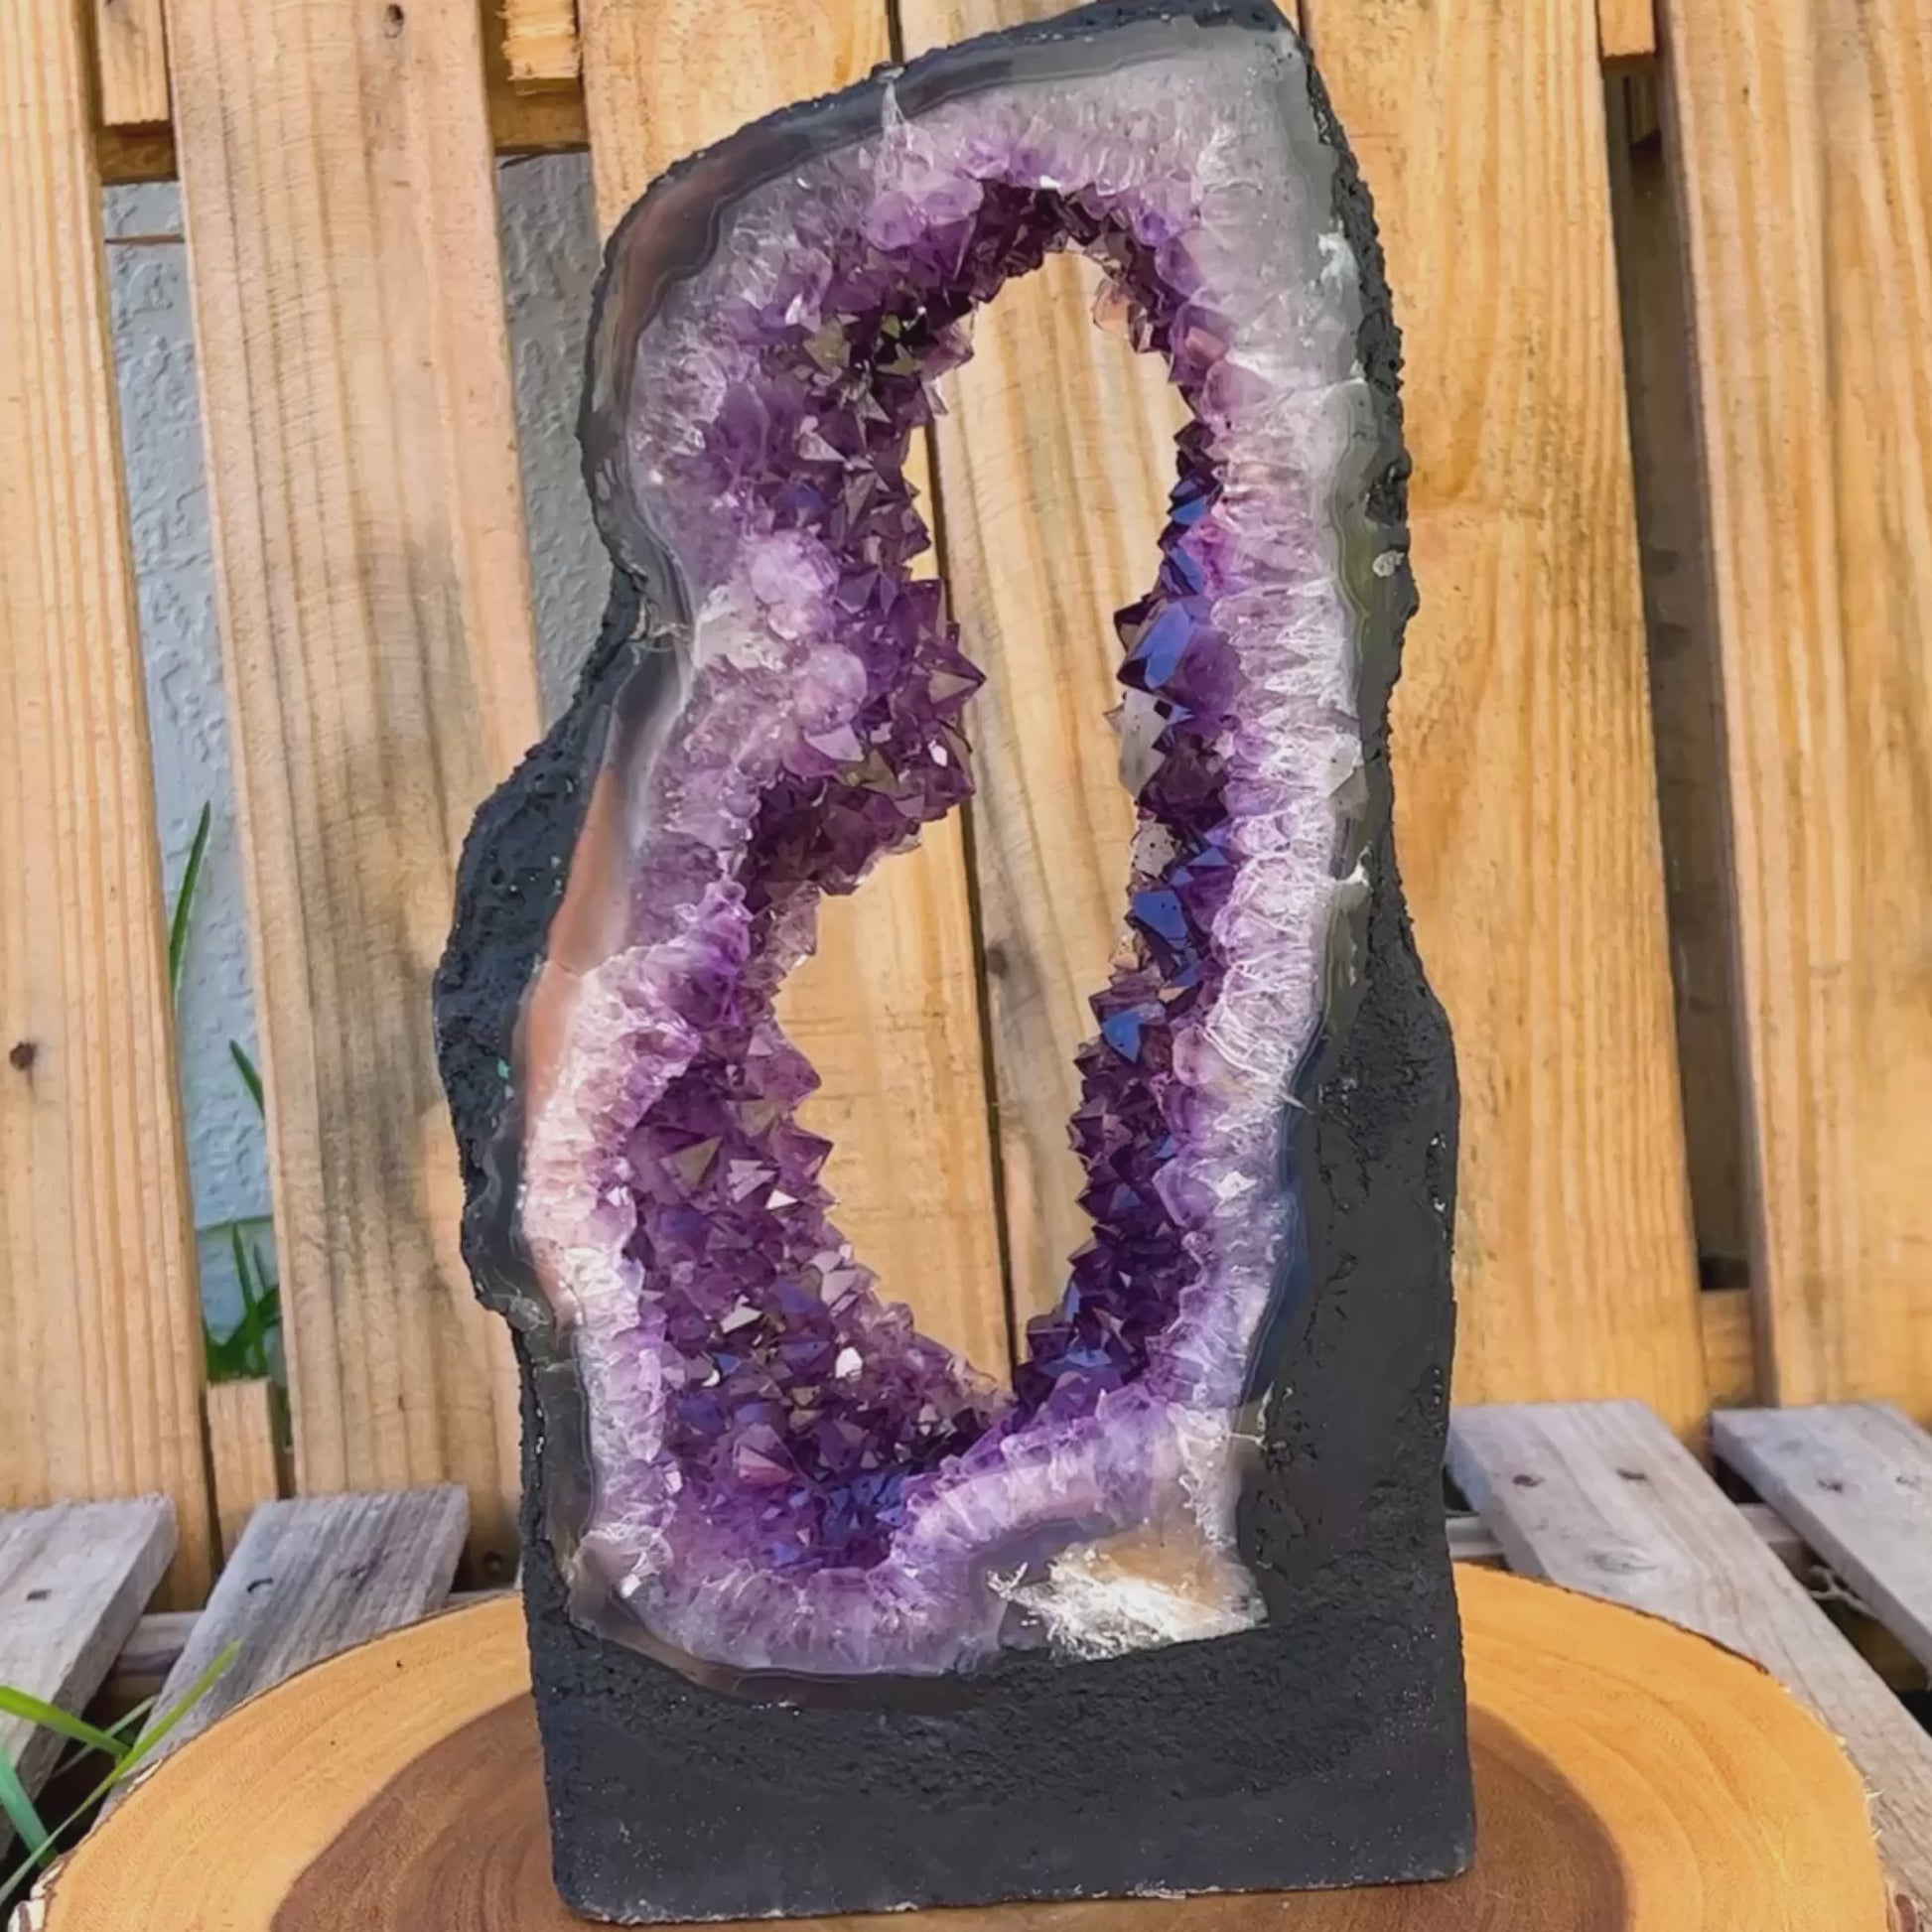 Large-Amethyst-Crystal-Cathedral. Buy Magic Crystals - Large Druzy Amethyst Cathedral, Amethyst Stone, Purple Amethyst Point, Amethyst Crystal Window double sided Amethyst Tower, Power Point at Magic Crystals. Natural Amethyst Gemstone for PROTECTION, PEACE, INSPIRATION. Magiccrystals.com offers FREE SHIPPING and the best quality gemstones.